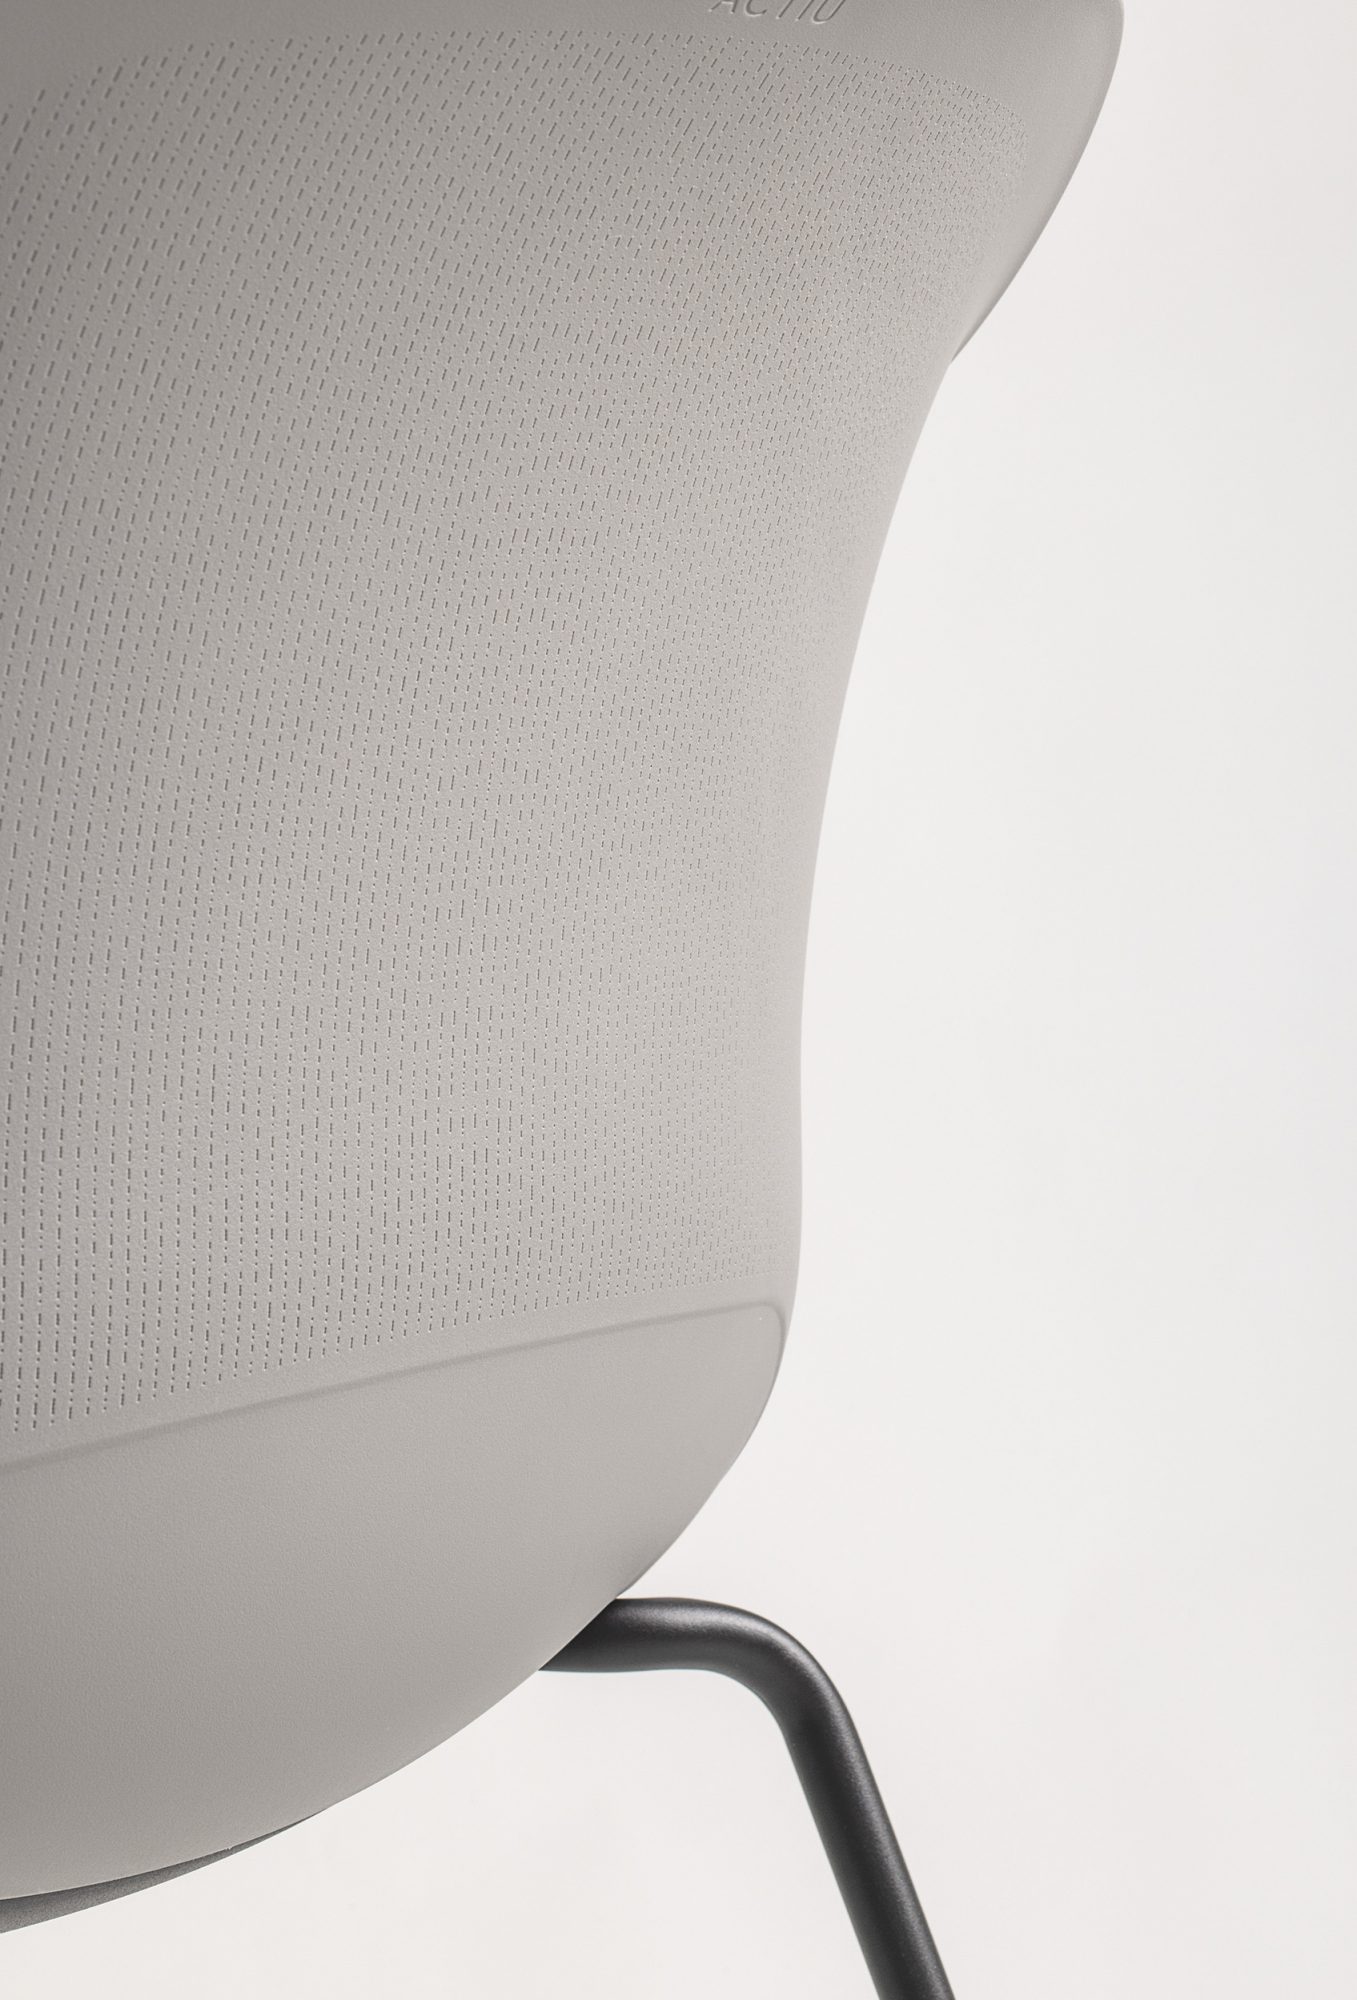 The image shows a detailed close-up of the back texture of the Noom 60 chair designed by Alegre Design for Actiu. The chair features a smooth, light gray surface with a subtle, fine-textured pattern. The black metal legs are partially visible, emphasizing the chair's minimalist and modern design.